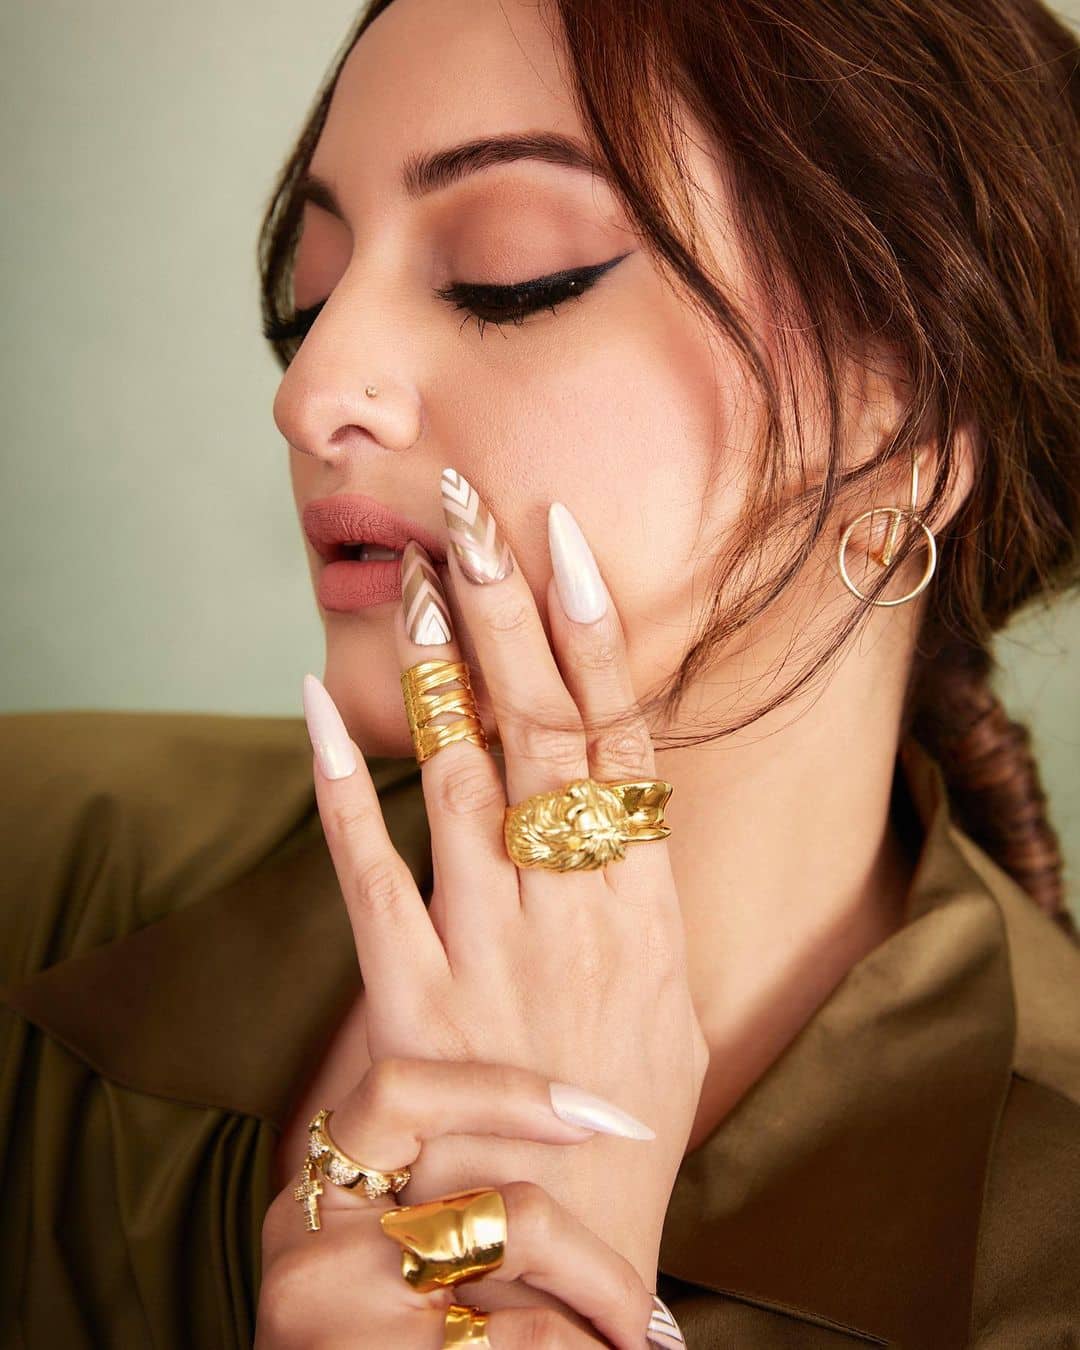 Nail art trends: Alia Bhatt, Huma Qureshi to Sonakshi, check out these  popular nail art designs sported by B-town divas | Hindustan Times